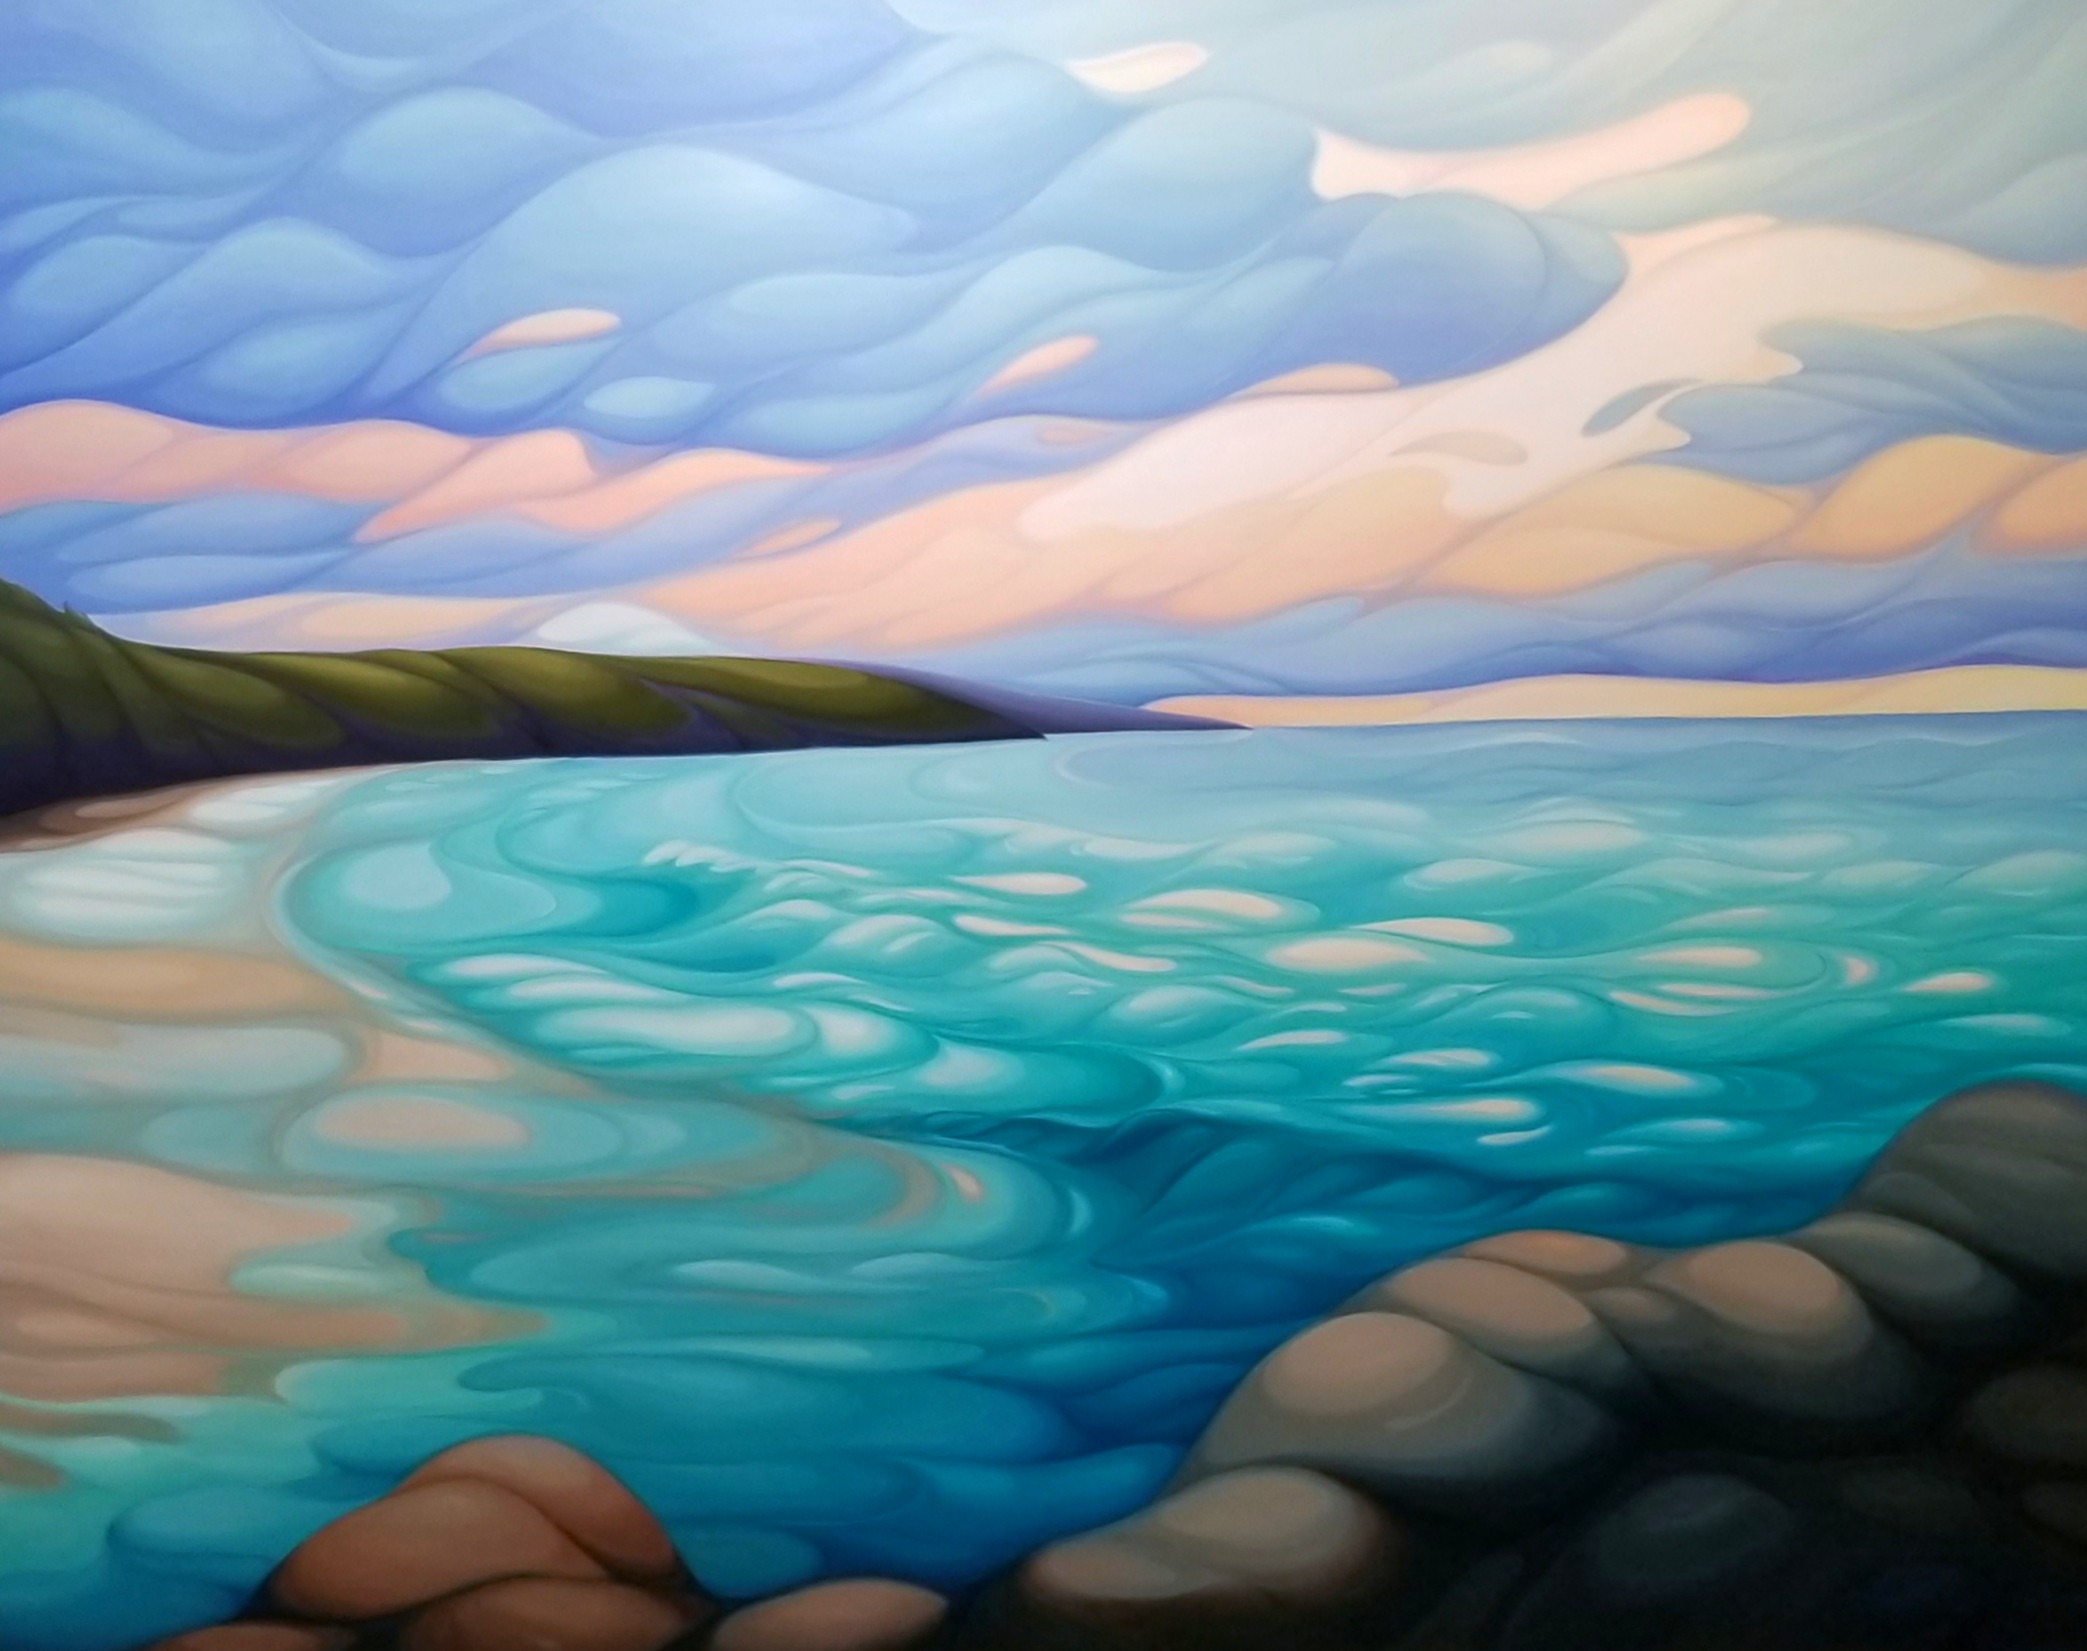 The Boat Channel, Georgian Bay
40x60”
SOLD